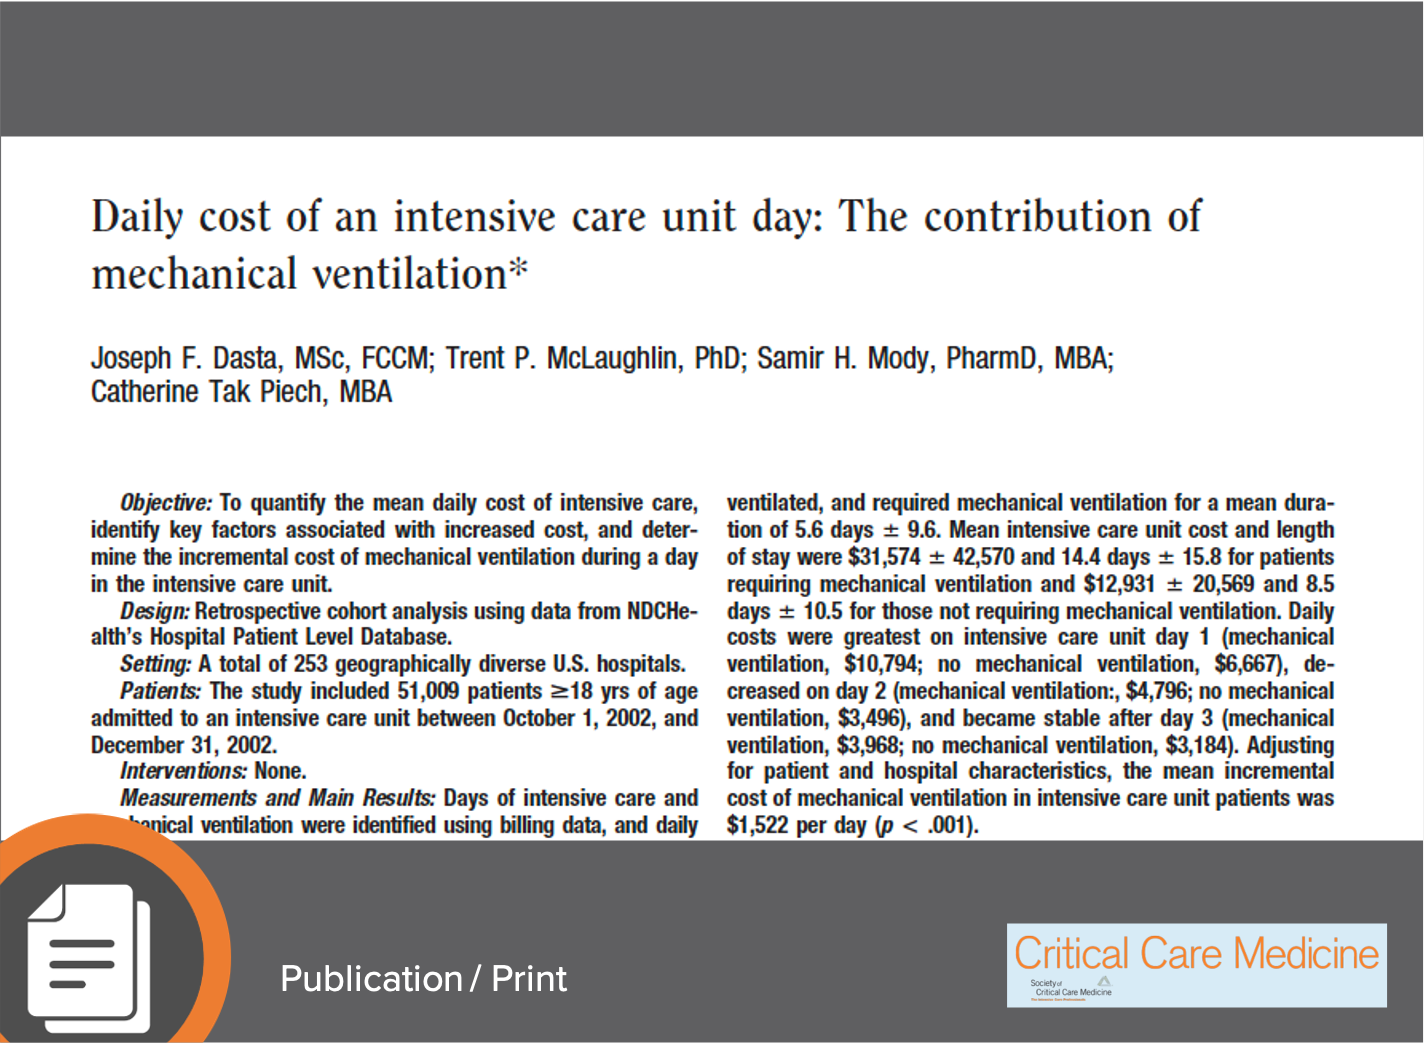 Dasta, J. et al. (2005) Daily Cost of an Intensive Care Unit Day: The Contribution of Mechanical Ventilation, Crit Care Med 33(6):1266-71. https://doi.org/10.1097/01.ccm.0000164543.14619.00